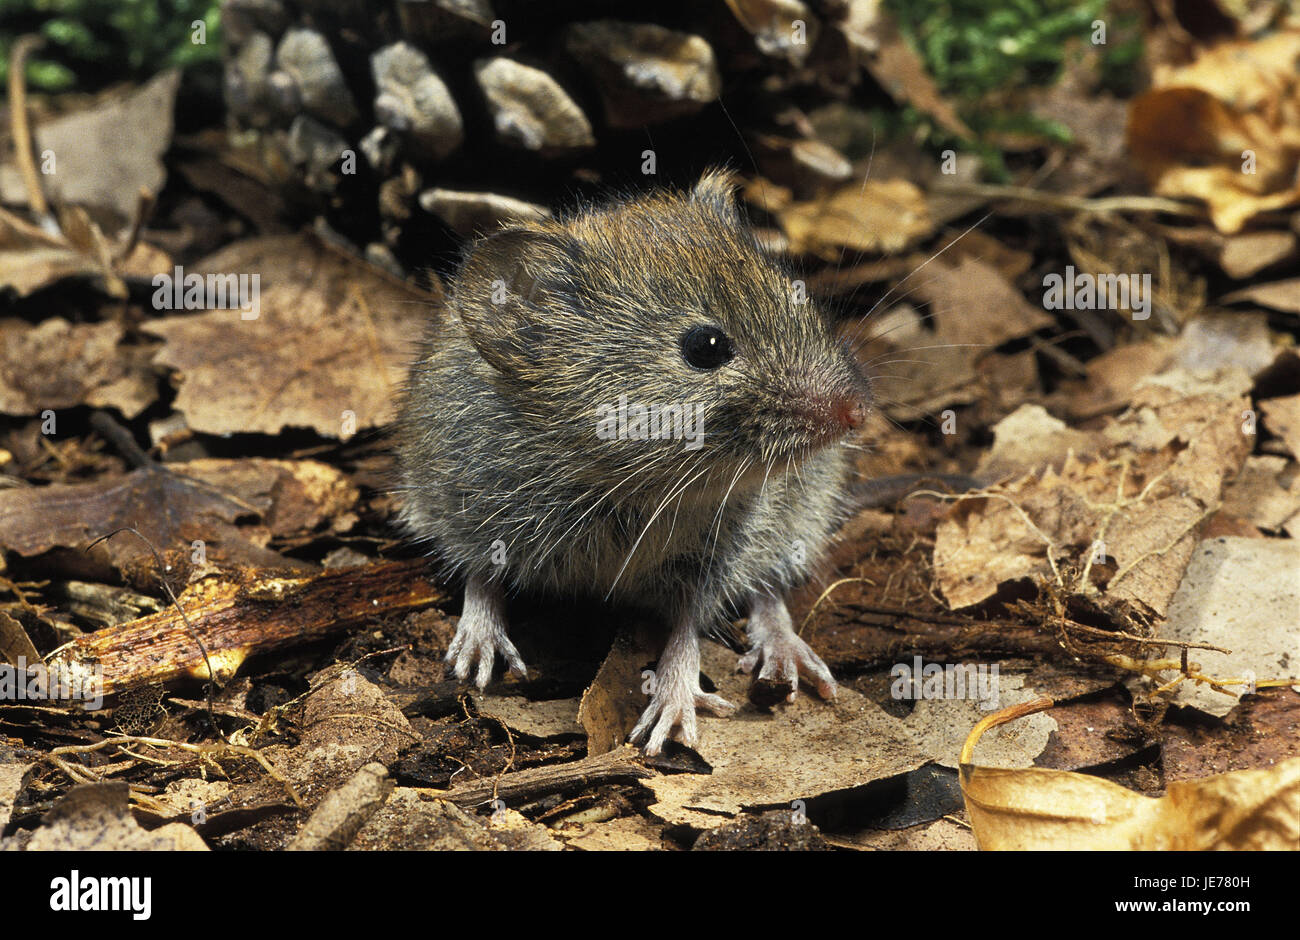 Gesso rosso mouse, Clethrionomys glareolus, animale adulto, stand, fogliame autunnale Foto Stock